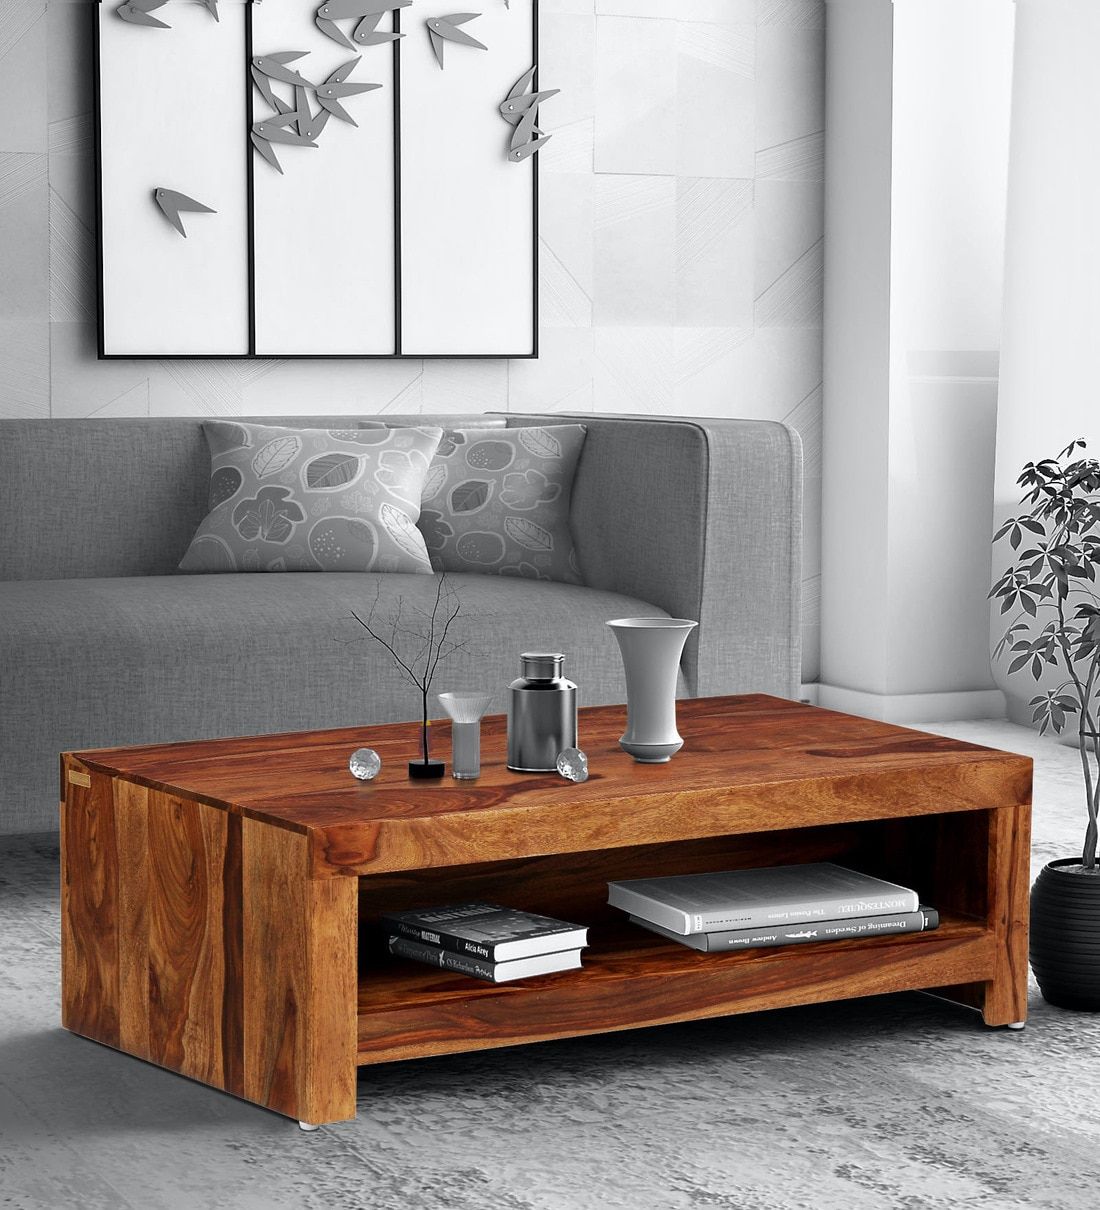 Buy Acropolis Solid Wood Coffee Table In Rustic Teak Finish Pertaining To Modern Wooden X Design Coffee Tables (View 7 of 15)